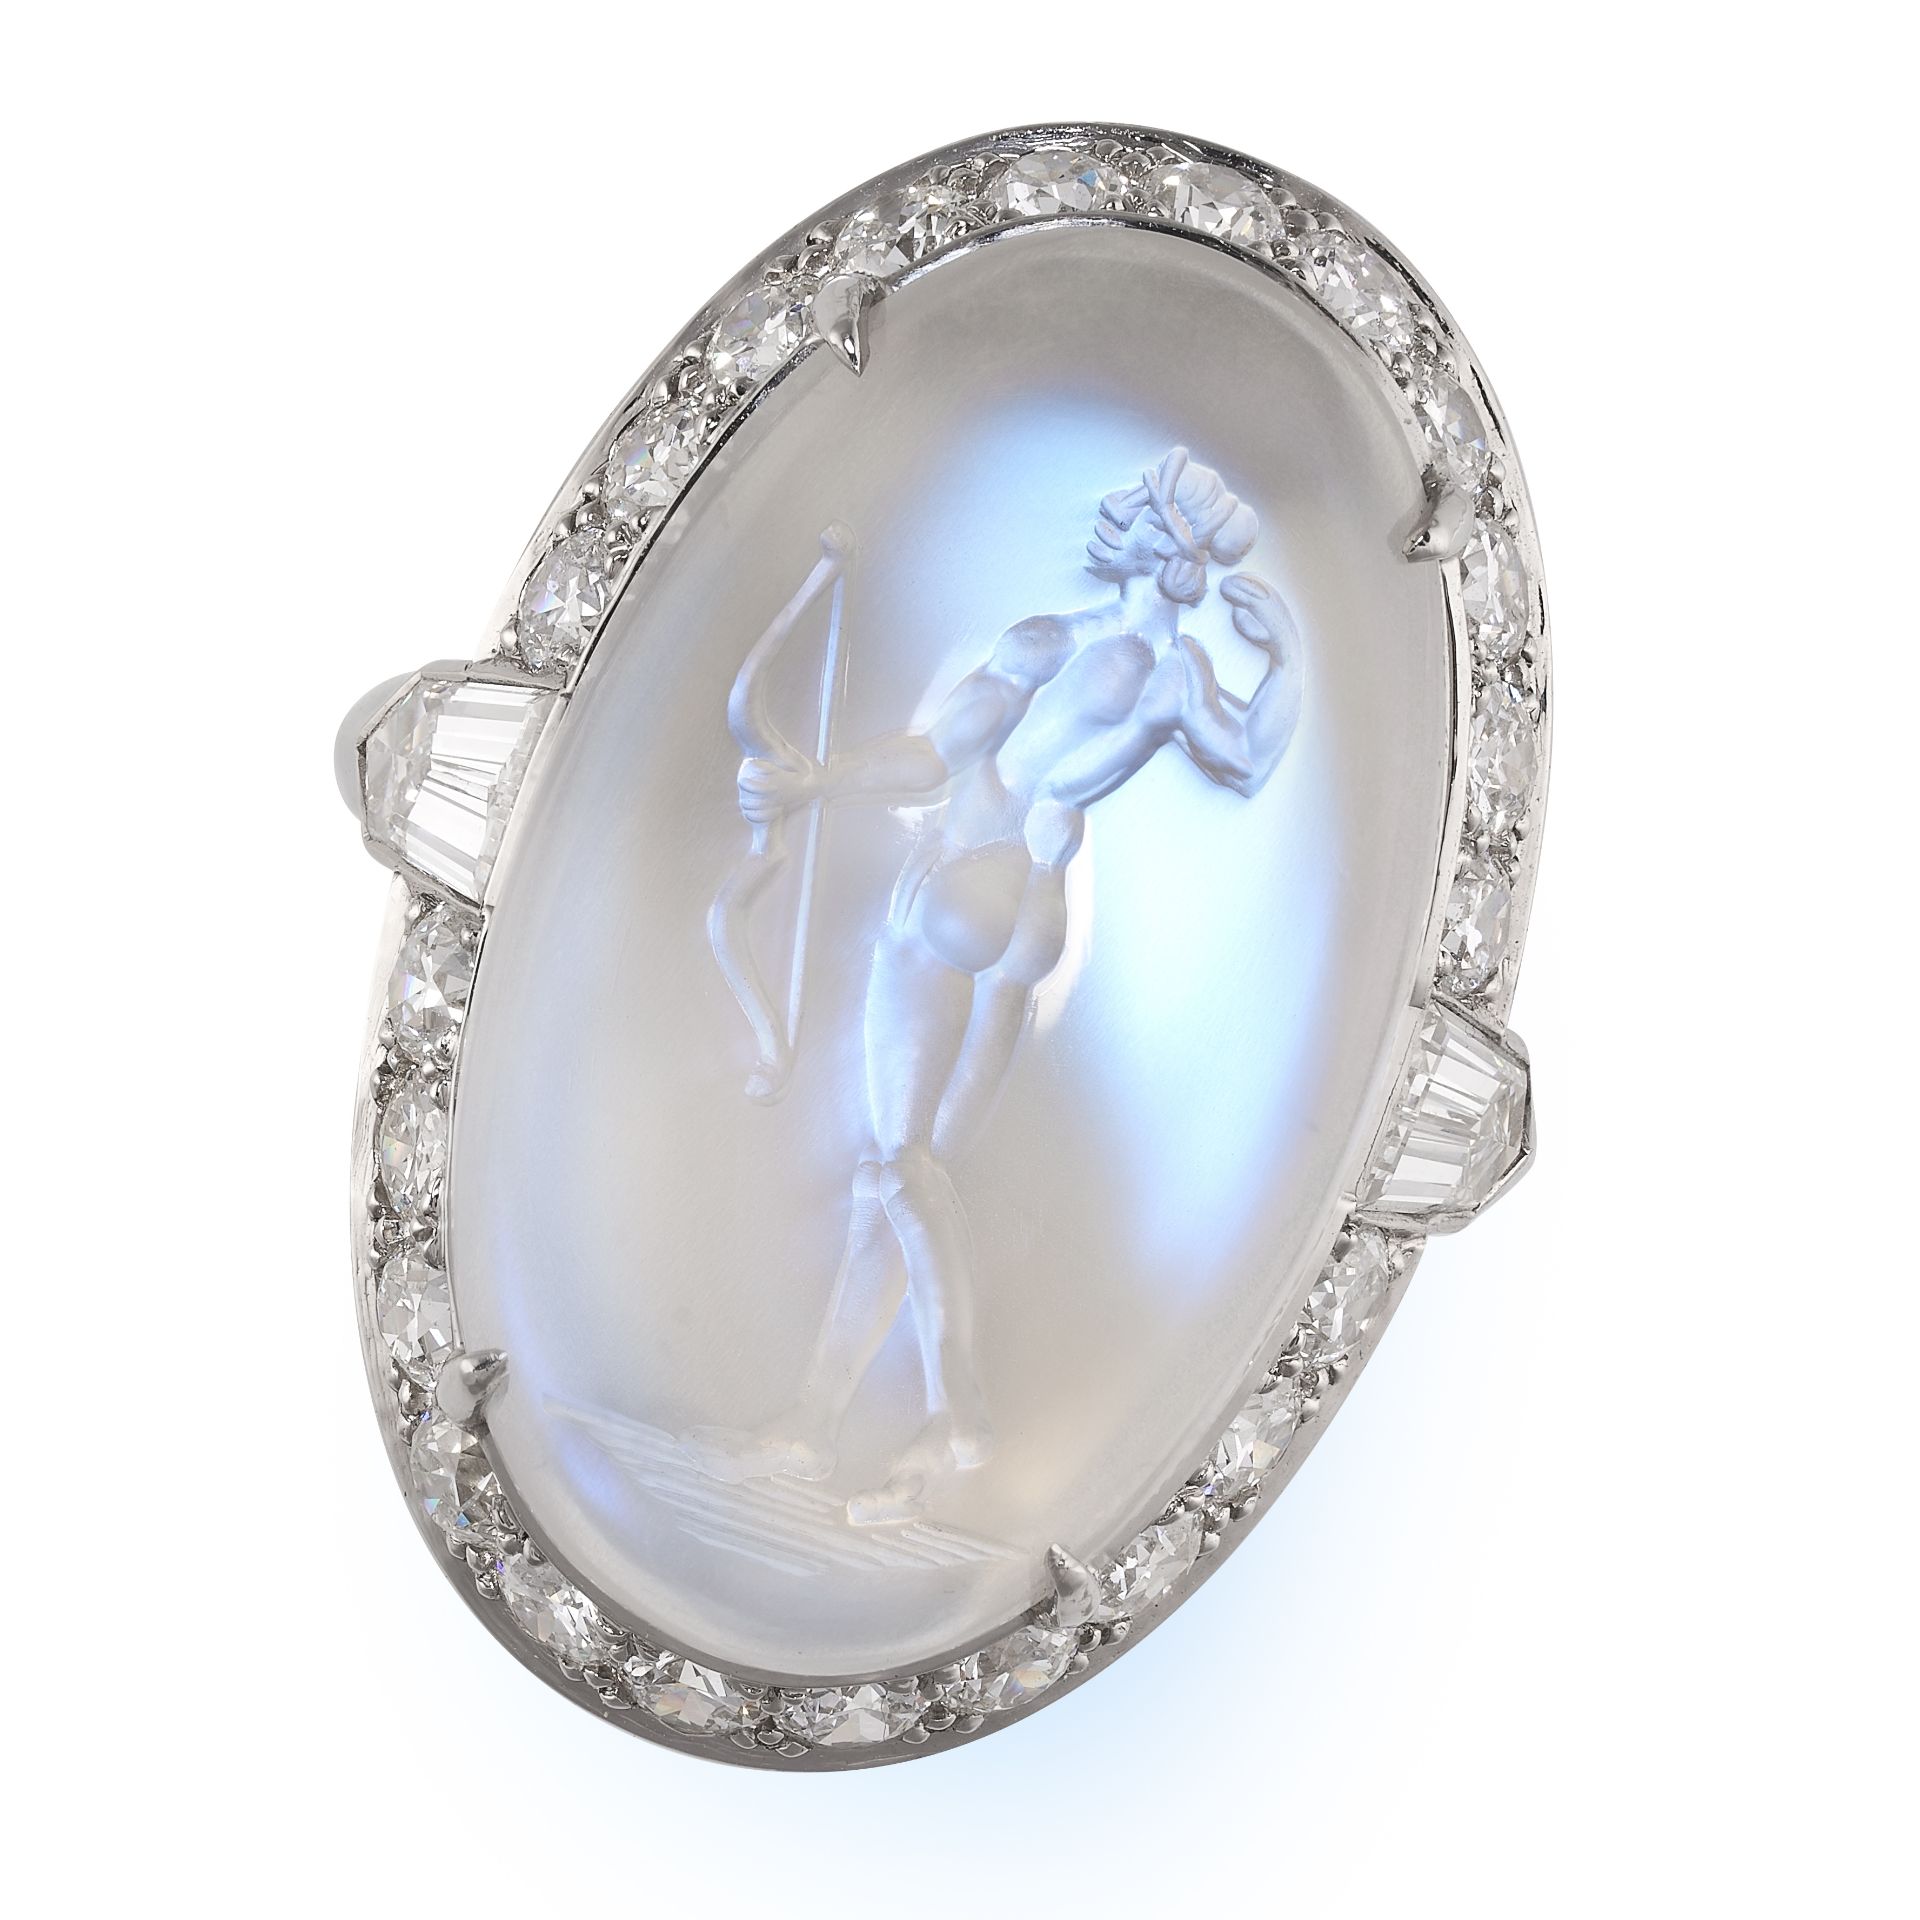 AN EXCEPTIONAL MOONSTONE INTAGLIO AND DIAMOND RING in platinum, set with a large oval carved